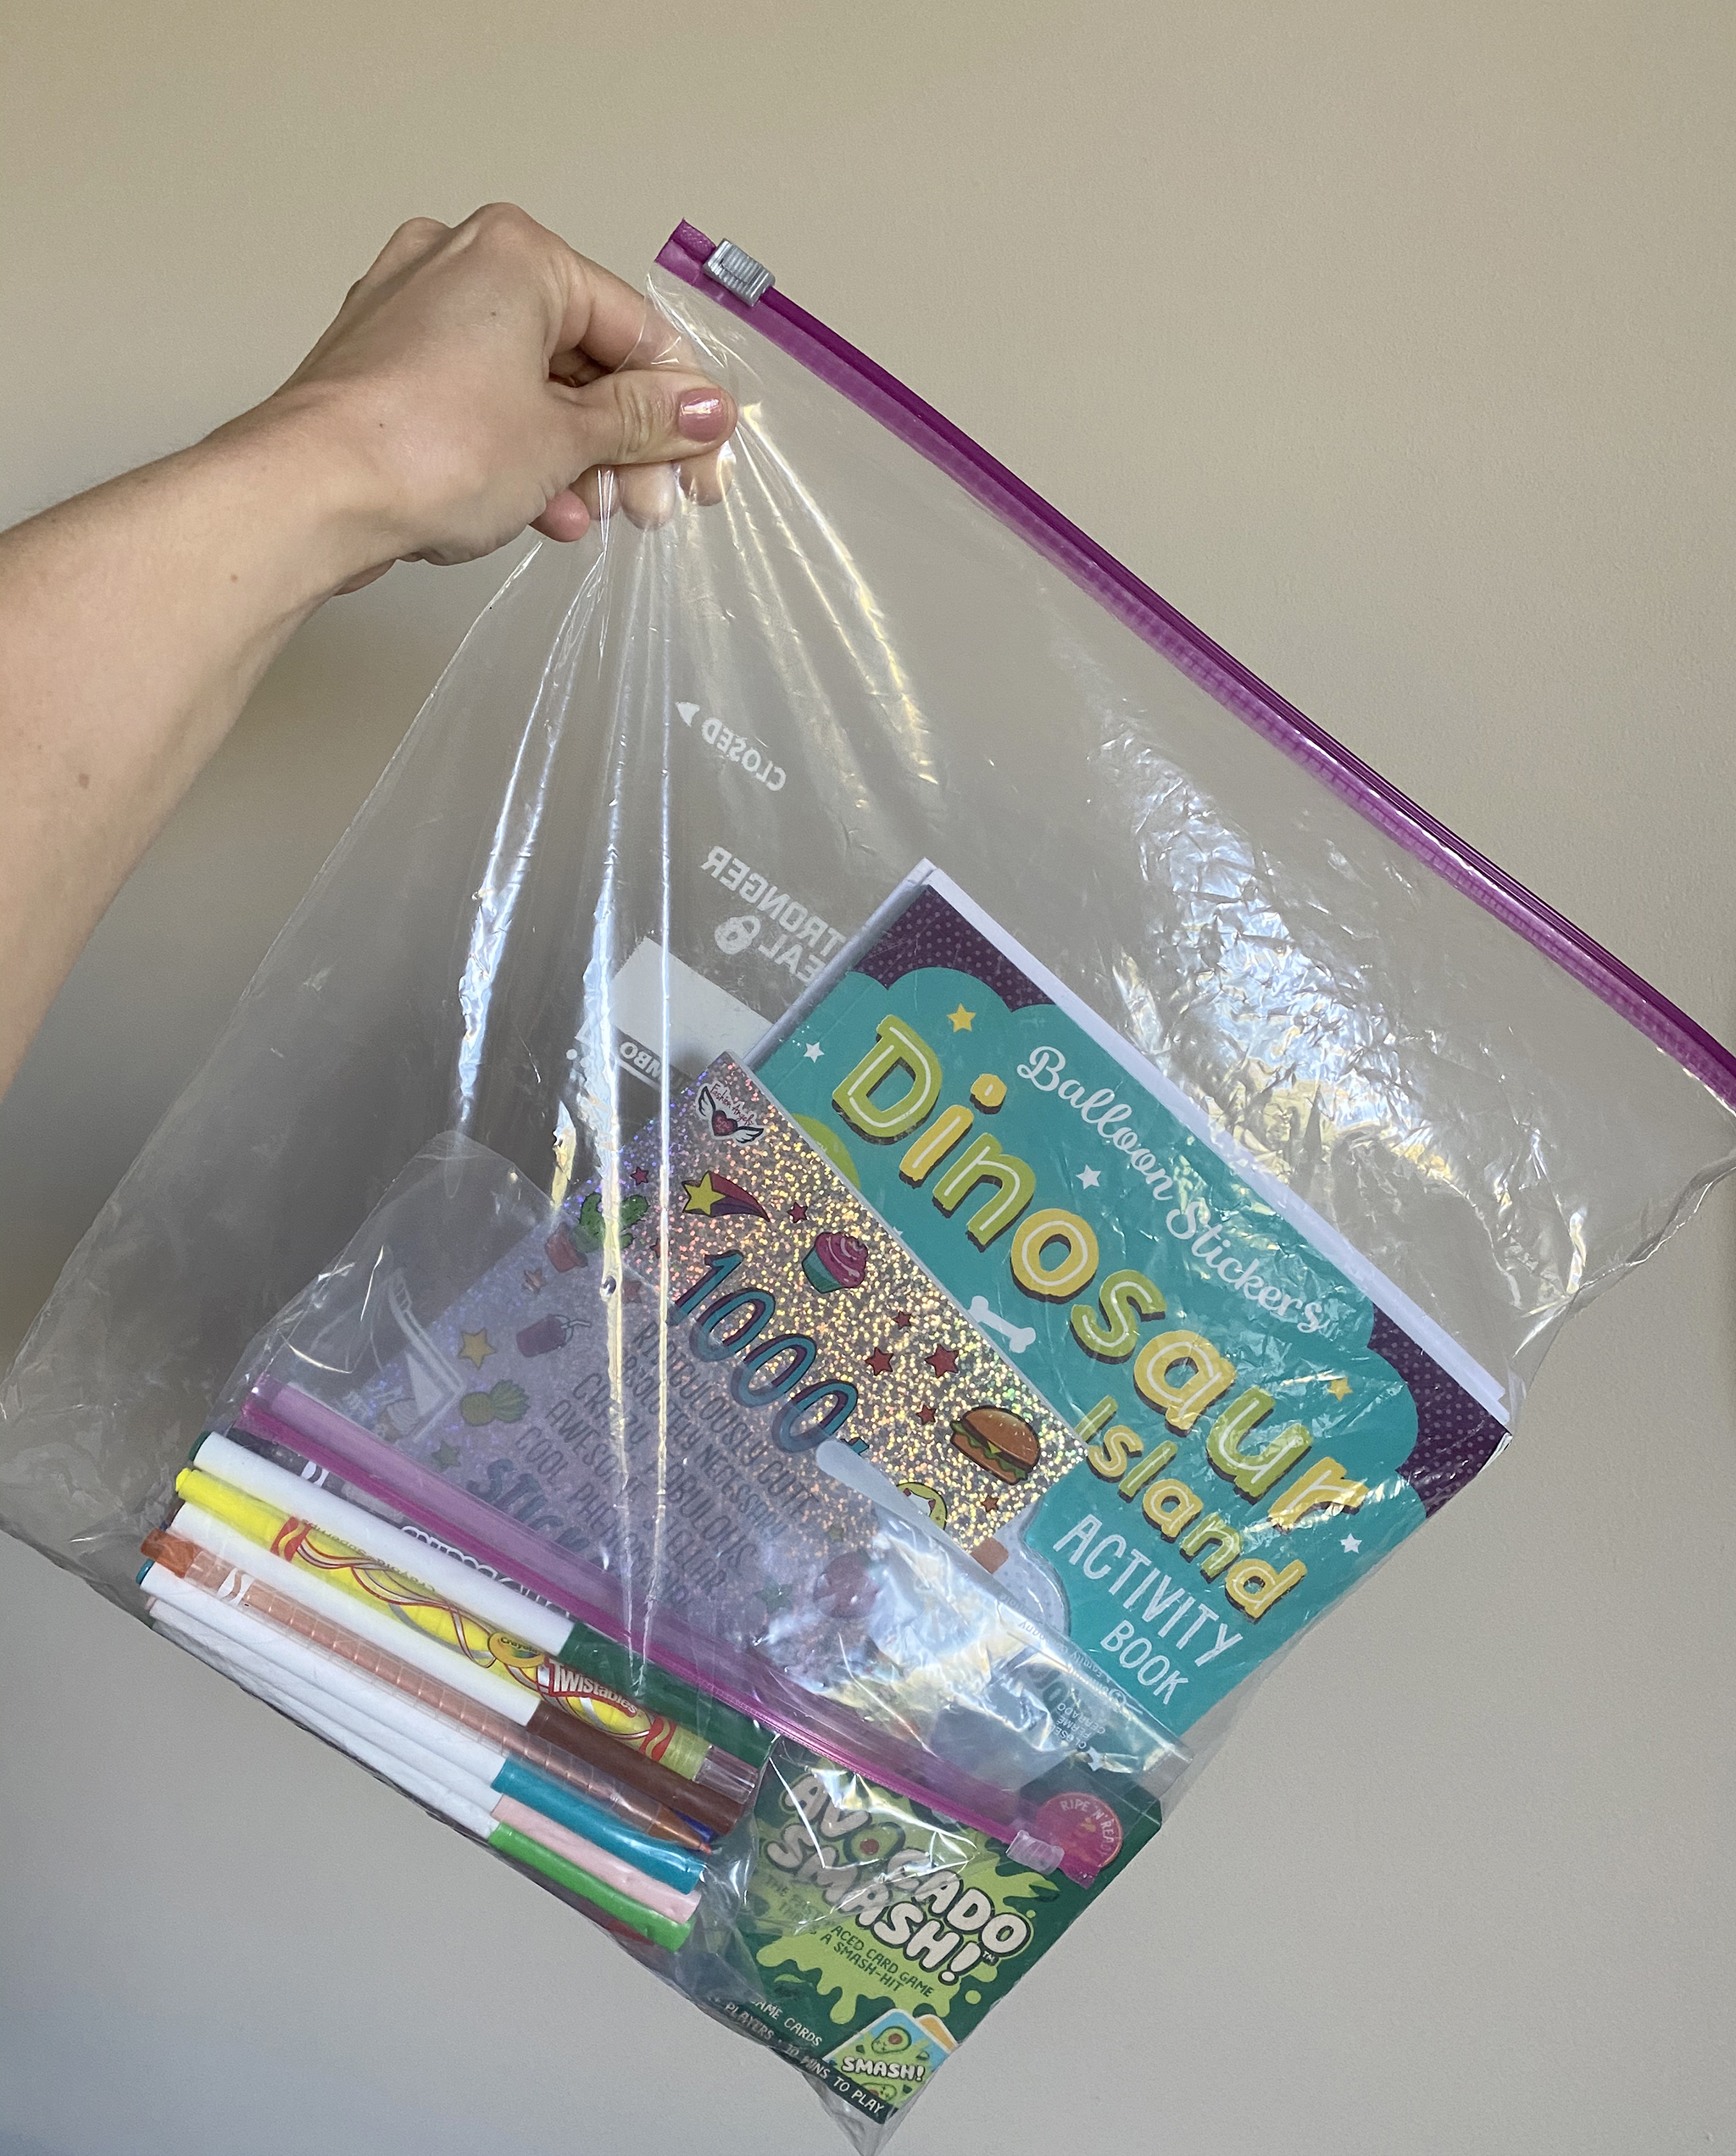 A fancy ziploc bag is usually my go-to to bring all the goodies to keep then entertained!